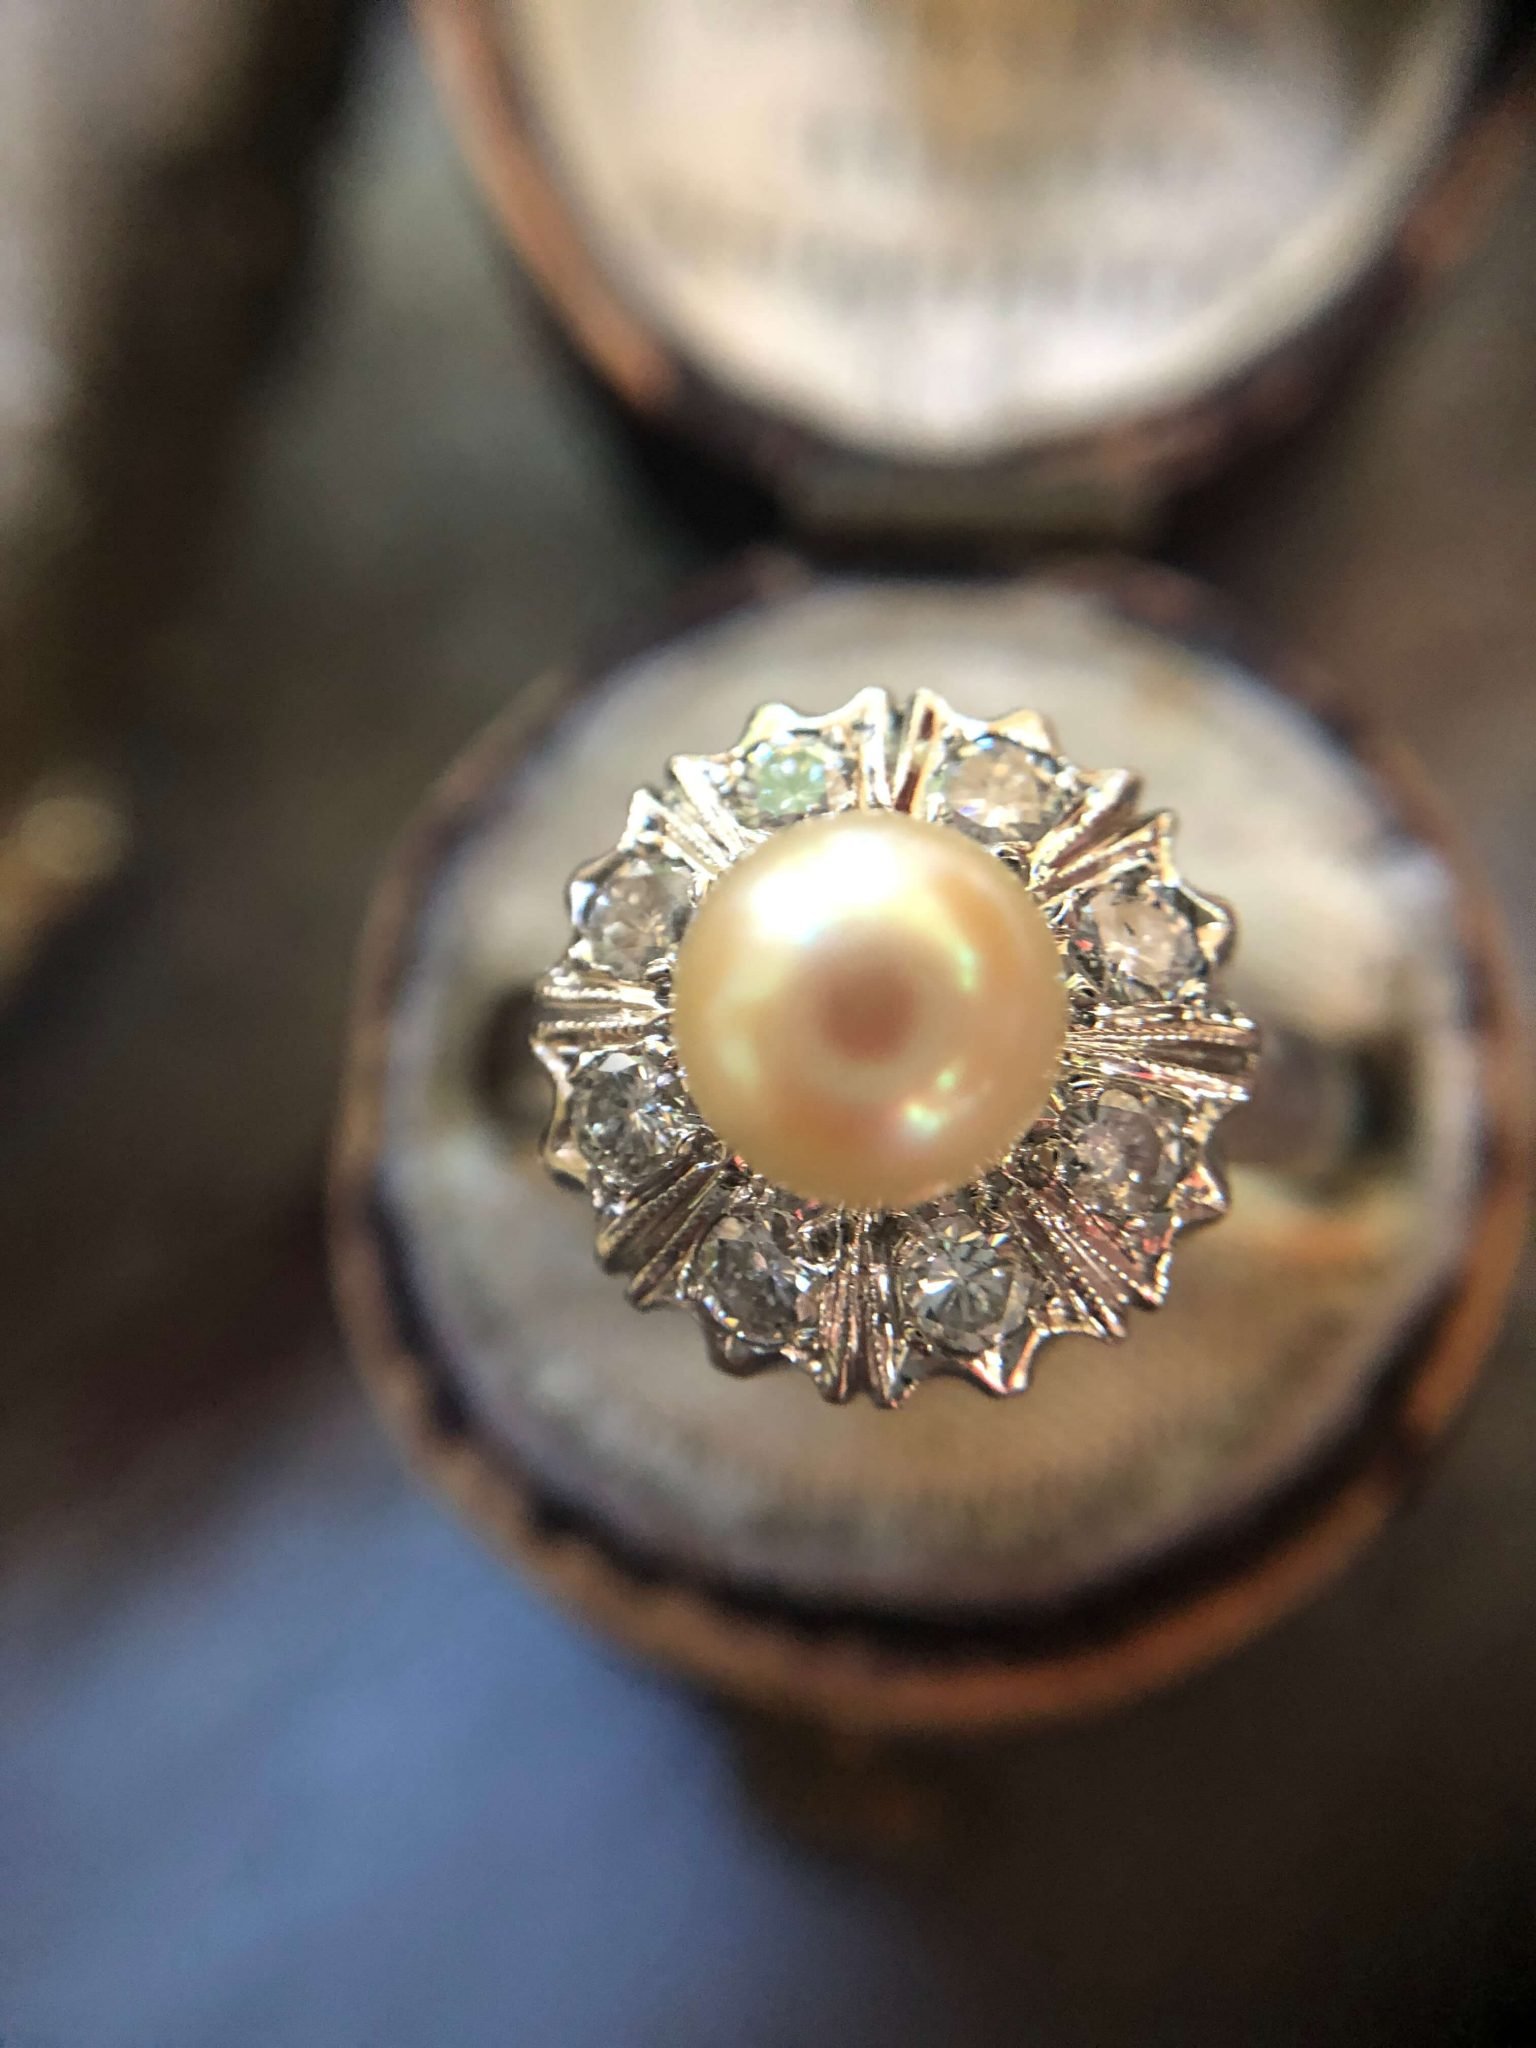 14kt White Gold Old Cut Diamond and Pearl Vintage Ring